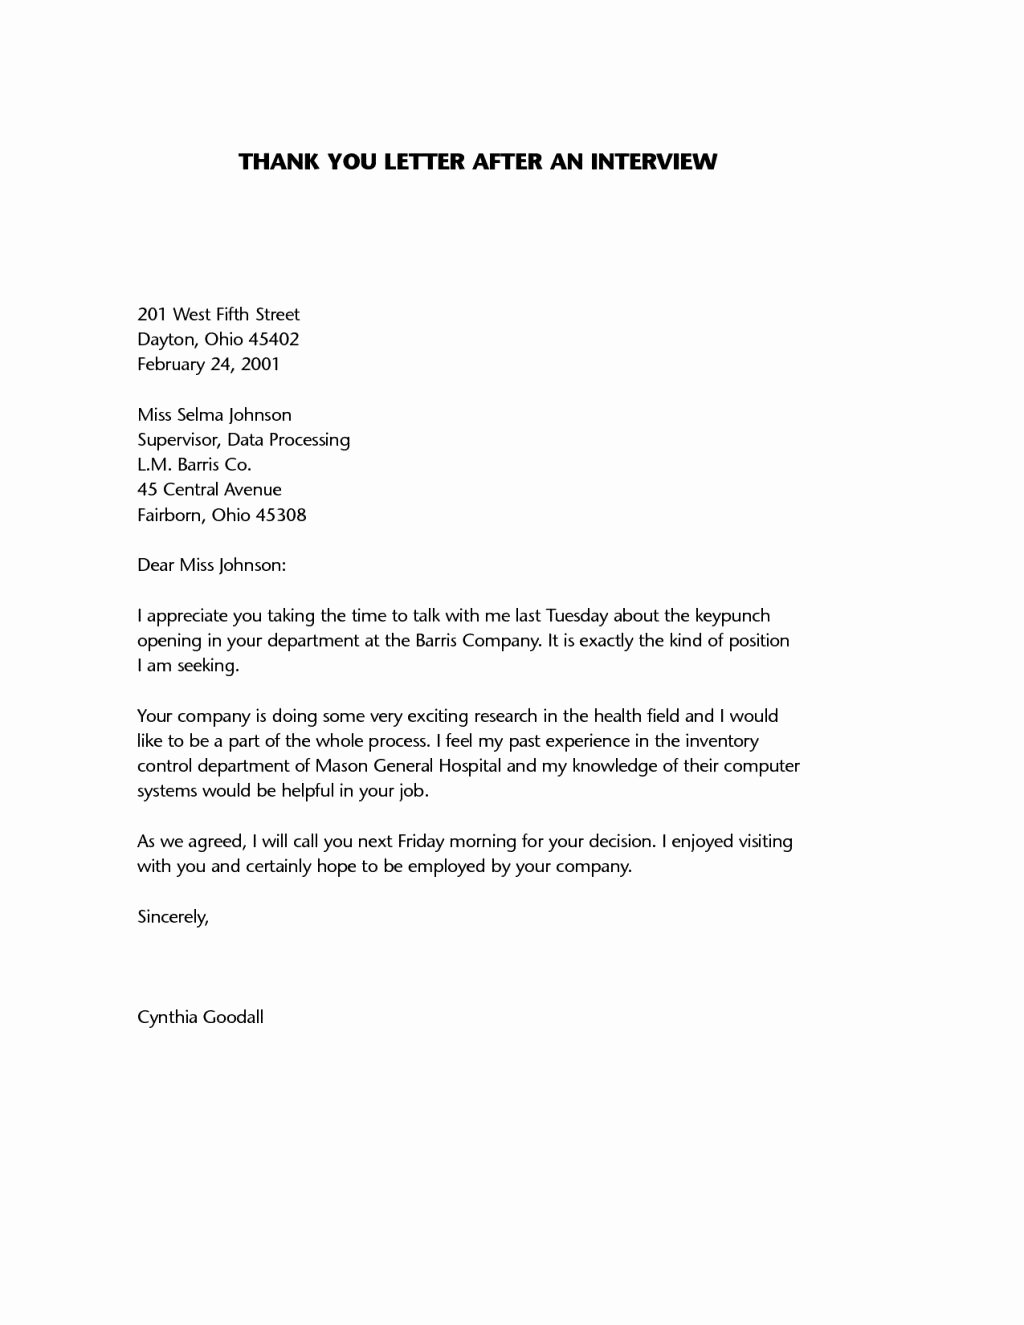 Letter after An Interview Beautiful Sample Thank You Letter after Interview